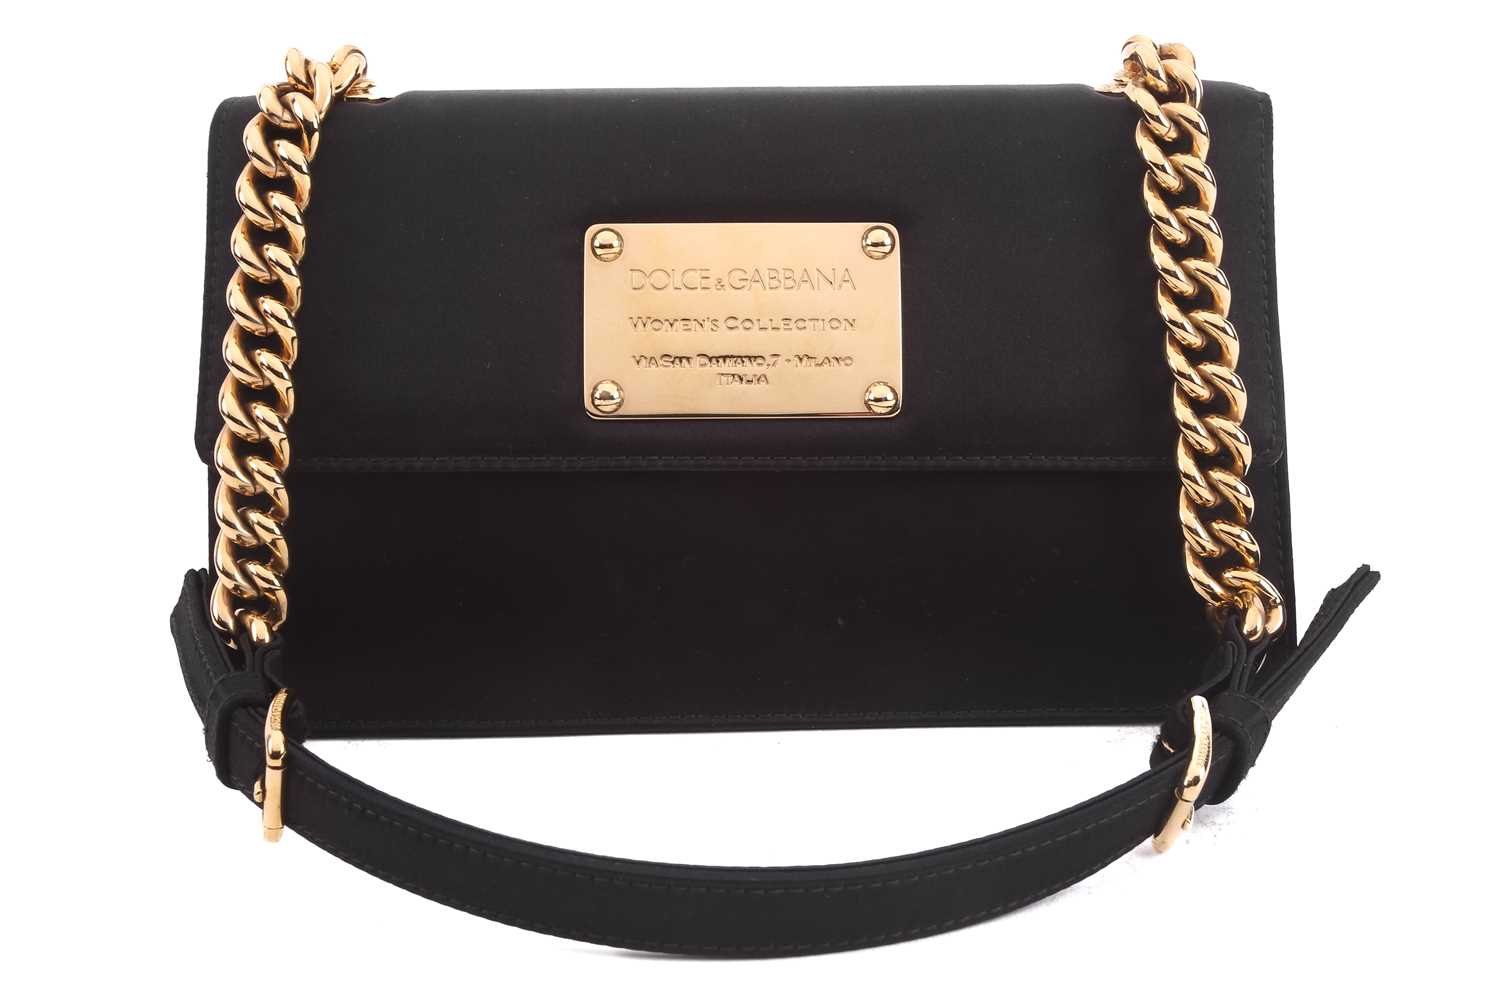 Dolce & Gabbana - 'Miss Belle' shoulder flap bag in black satin, with leather trims and pink satin - Image 3 of 8